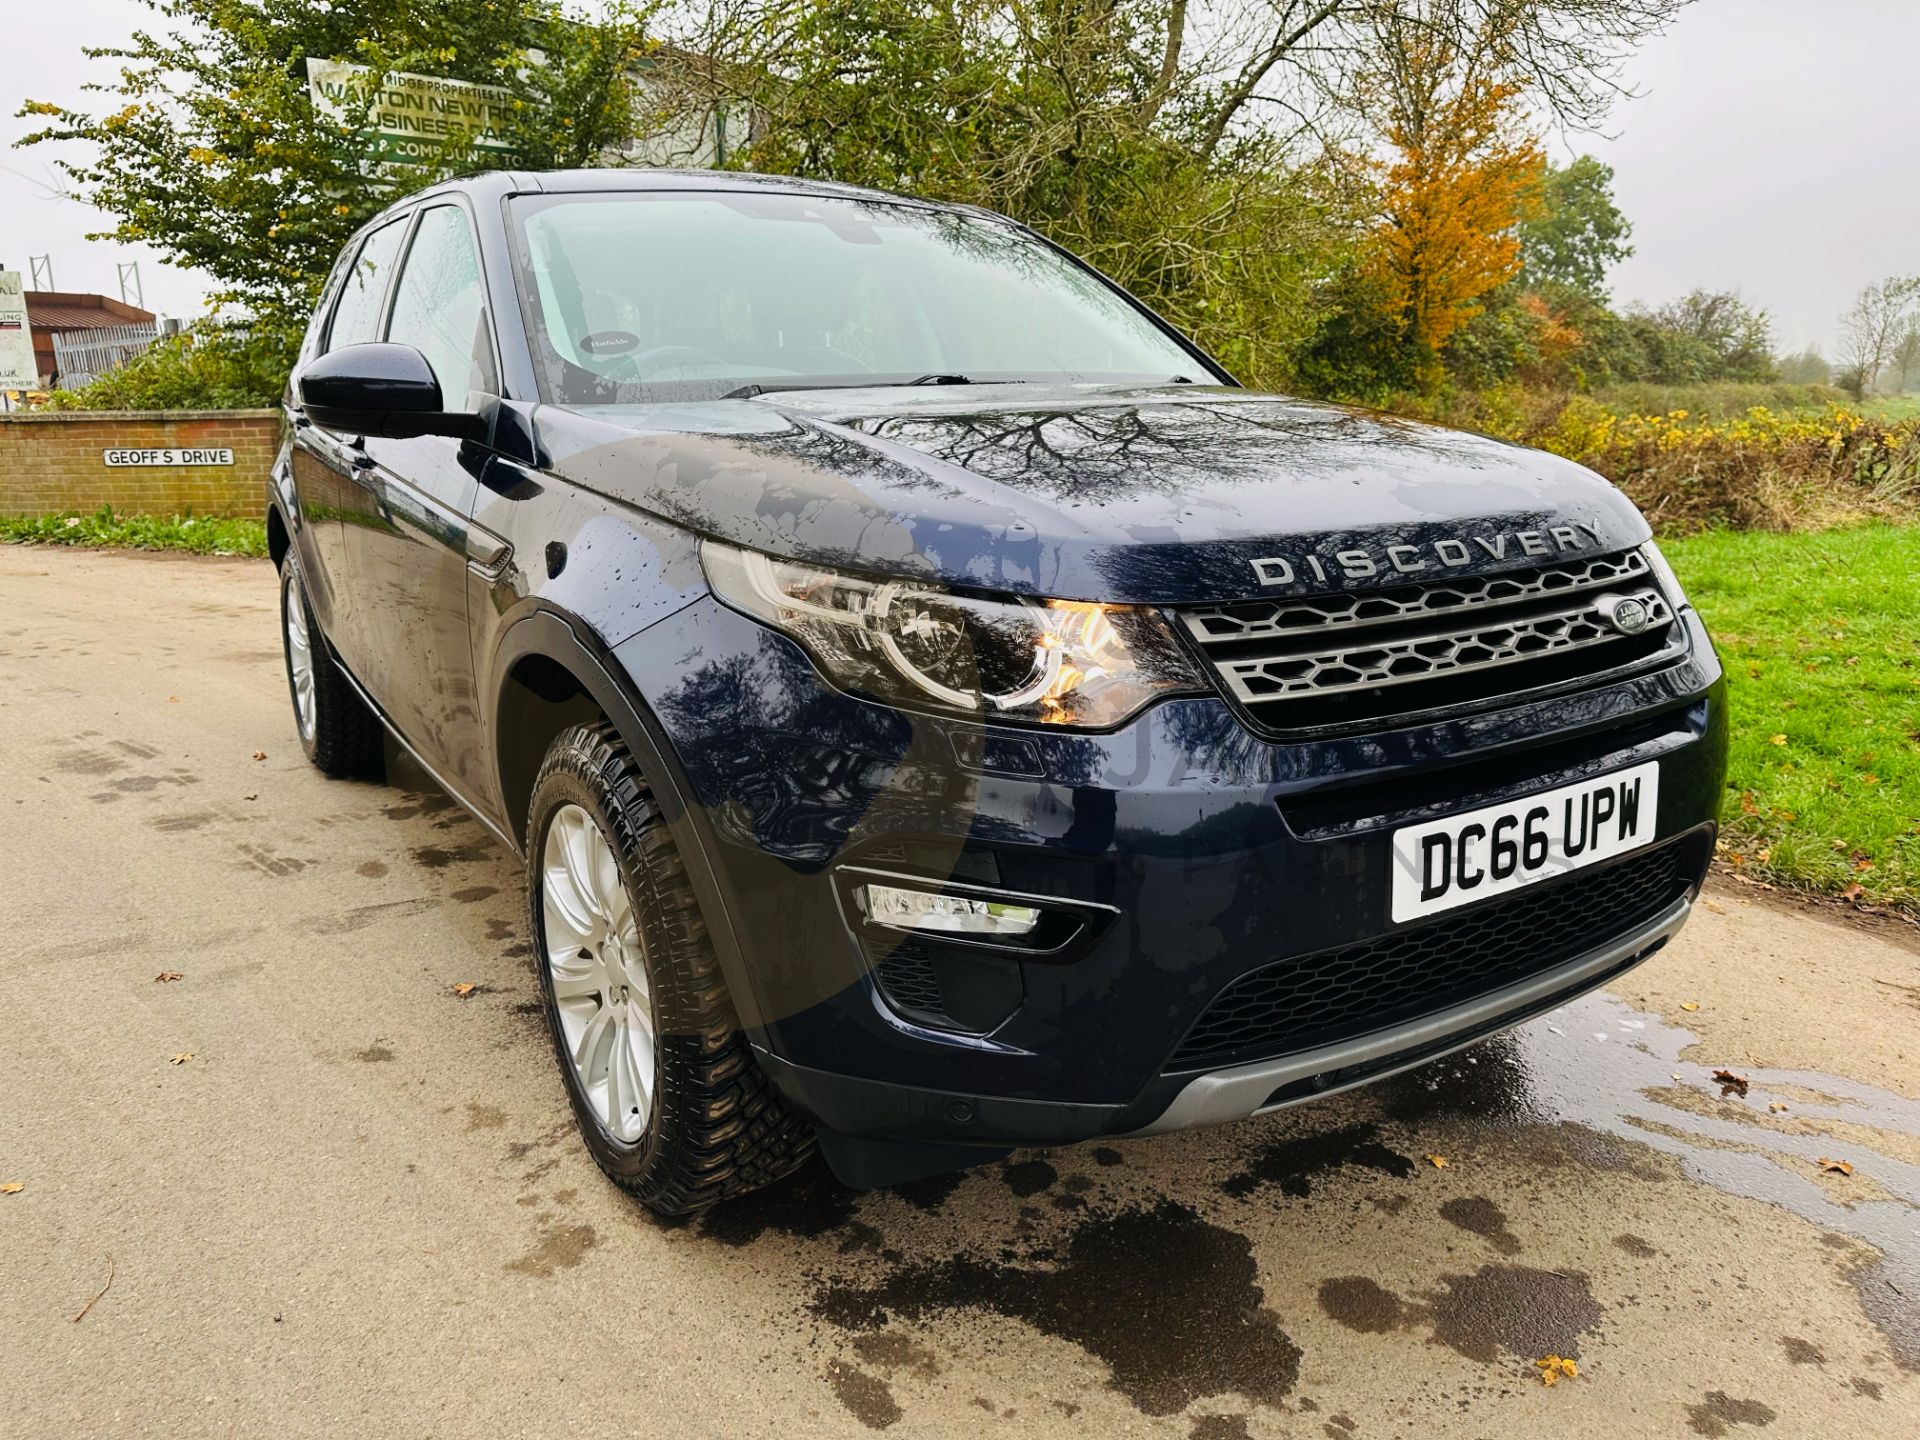 (ON SALE) LAND ROVER DISCOVERY SPORT *SE TECH* 2017 MODEL - FULL SERVICE HISTORY -1 OWNER - NO VAT!! - Image 3 of 43